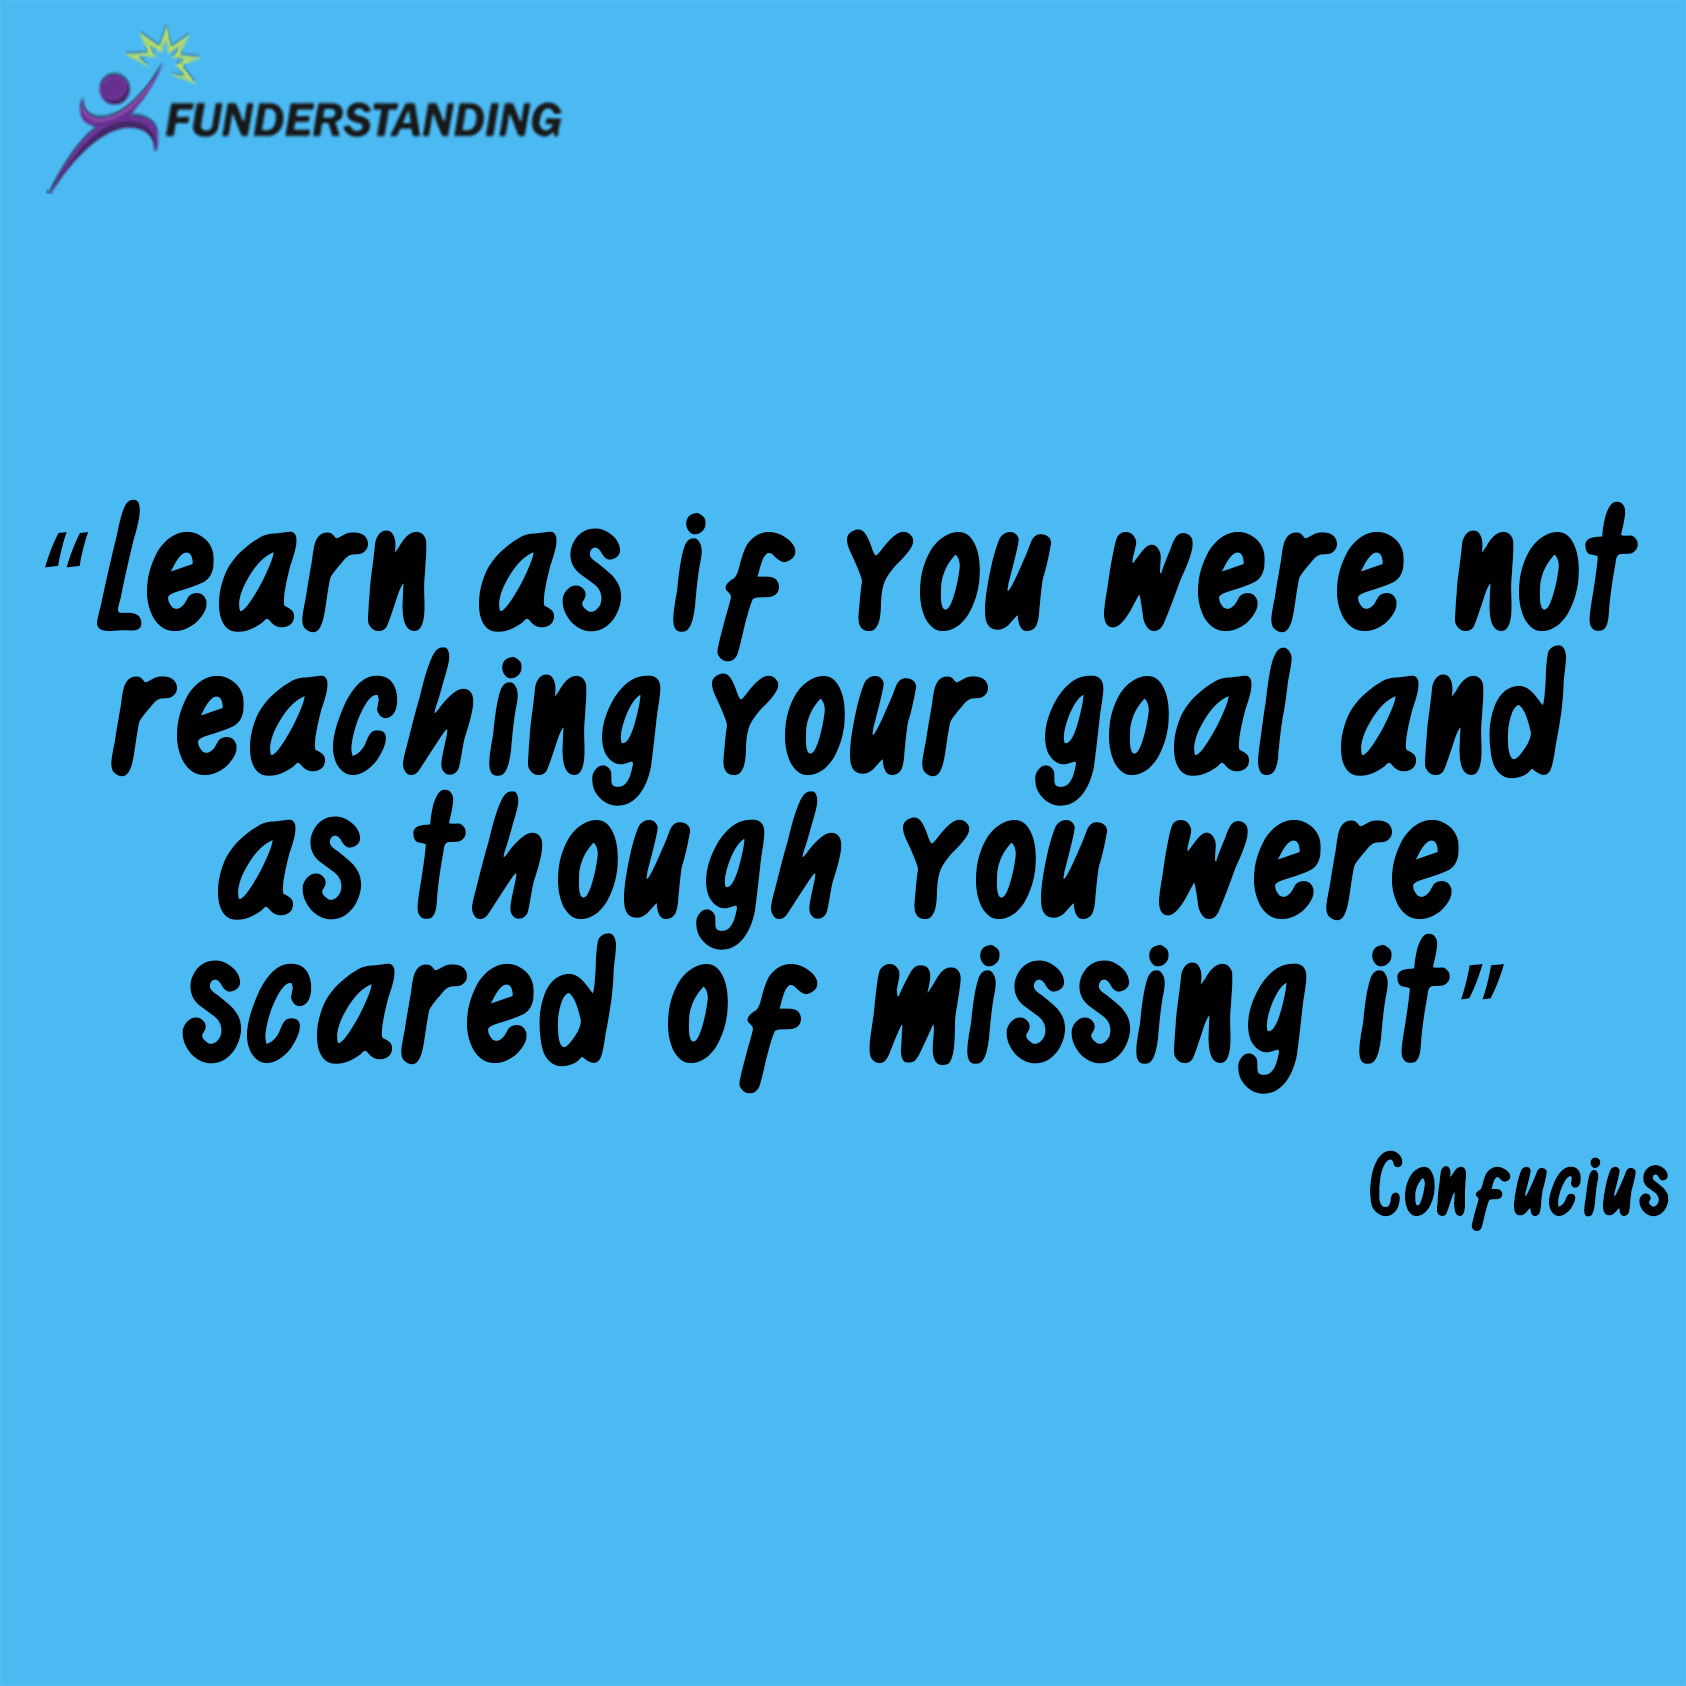 Educational Quotes | Funderstanding: Education, Curriculum and Learning